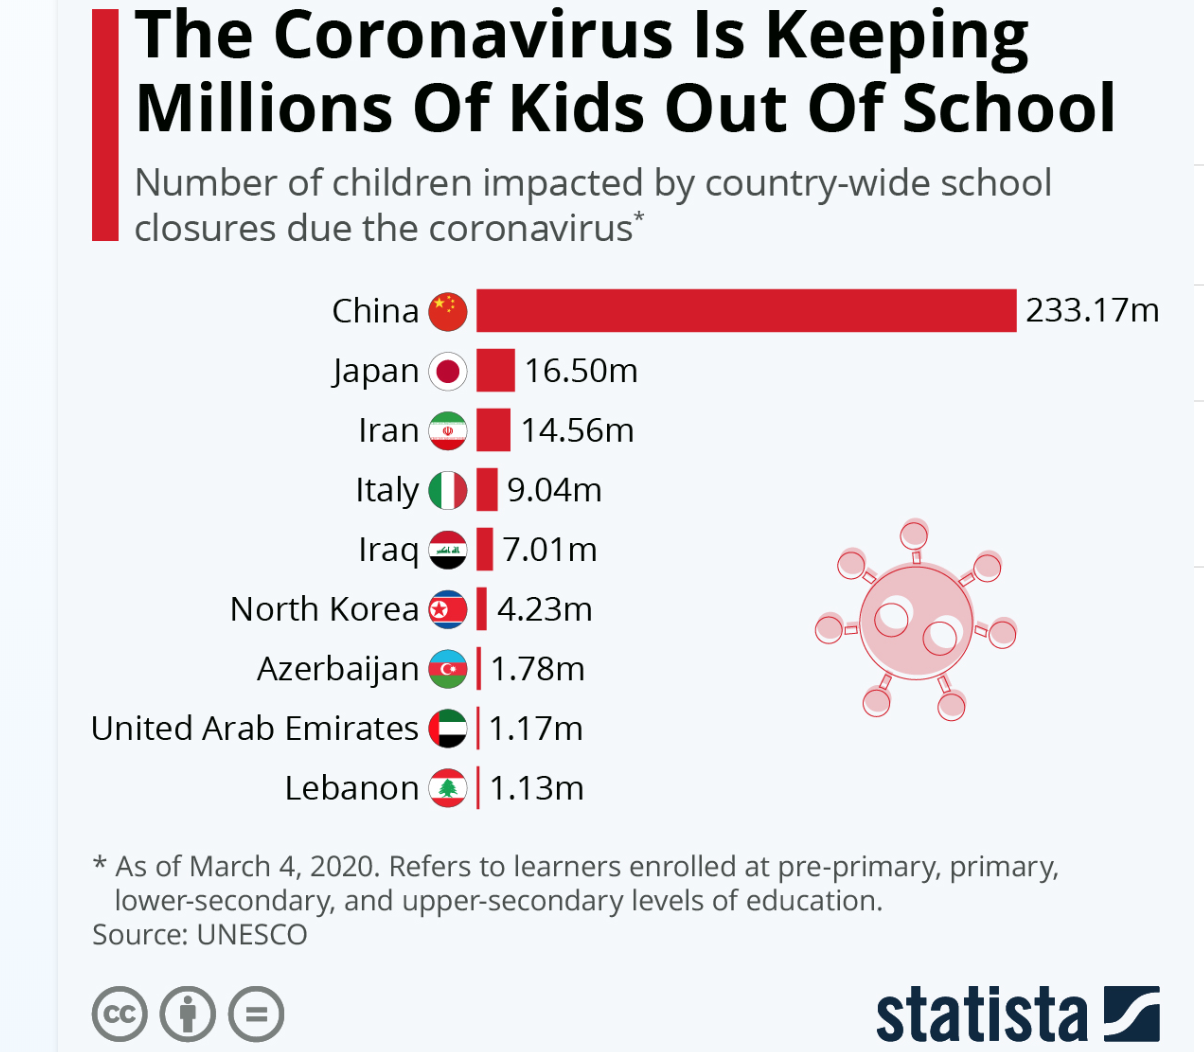 The Coronavirus is keeping Millions of kids out of schools